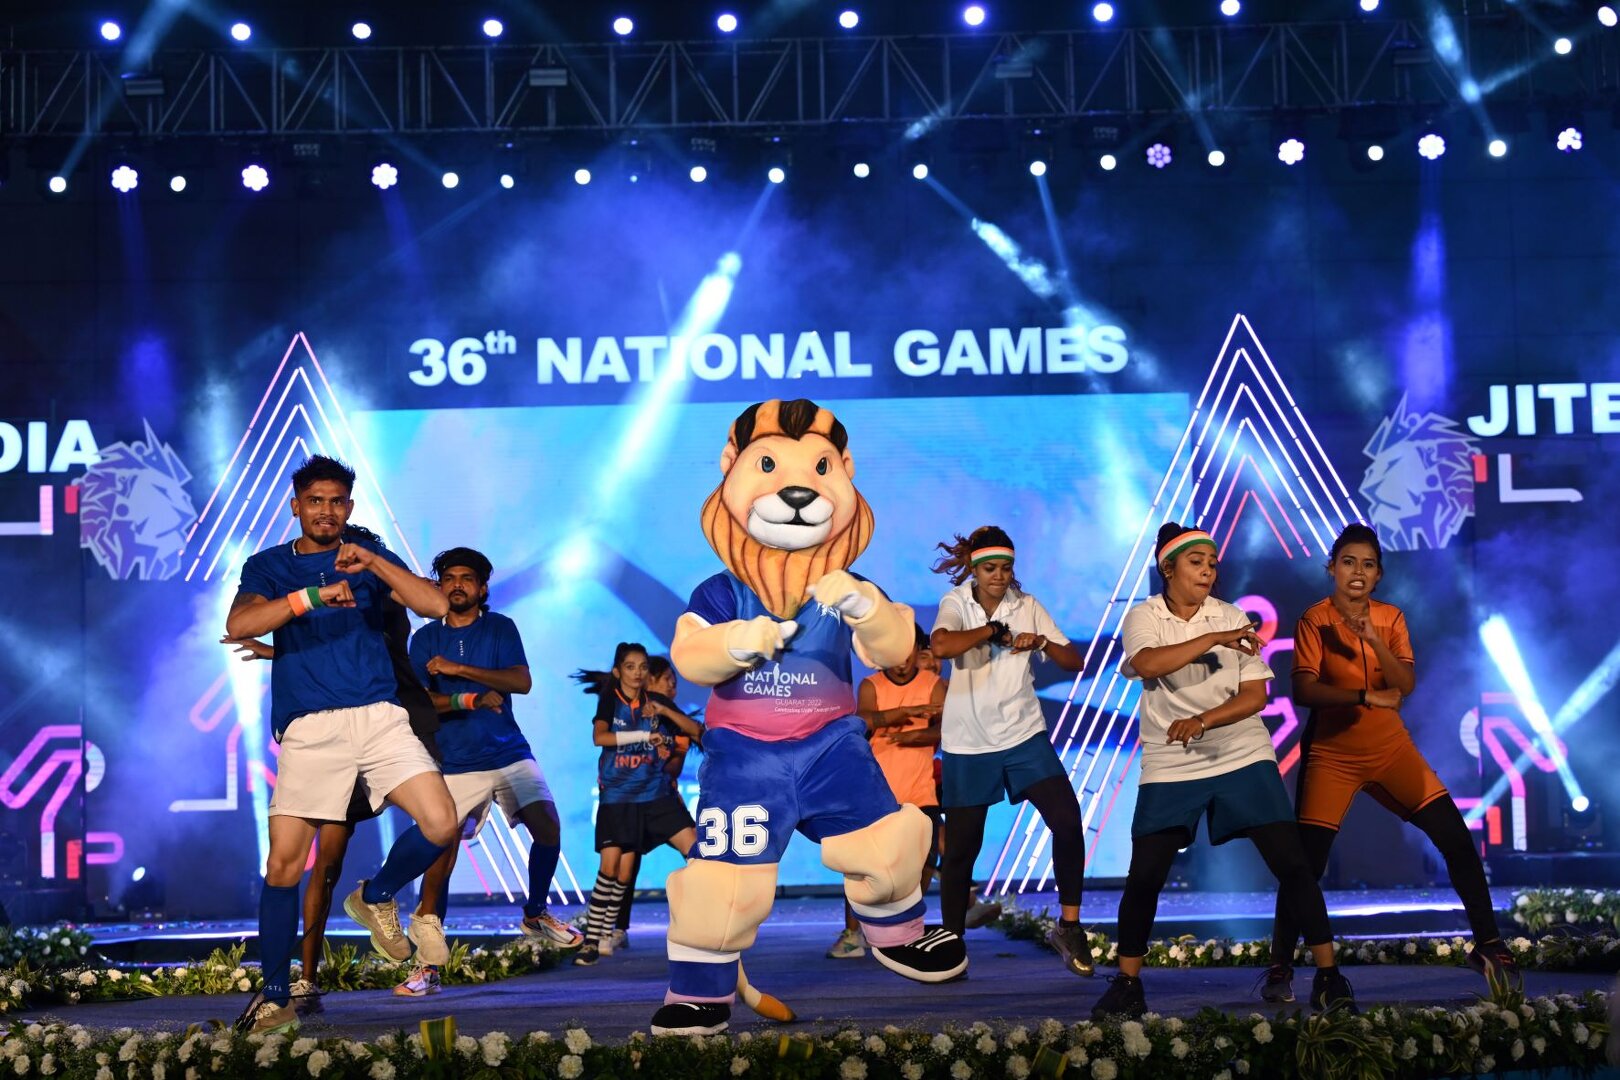 National Games